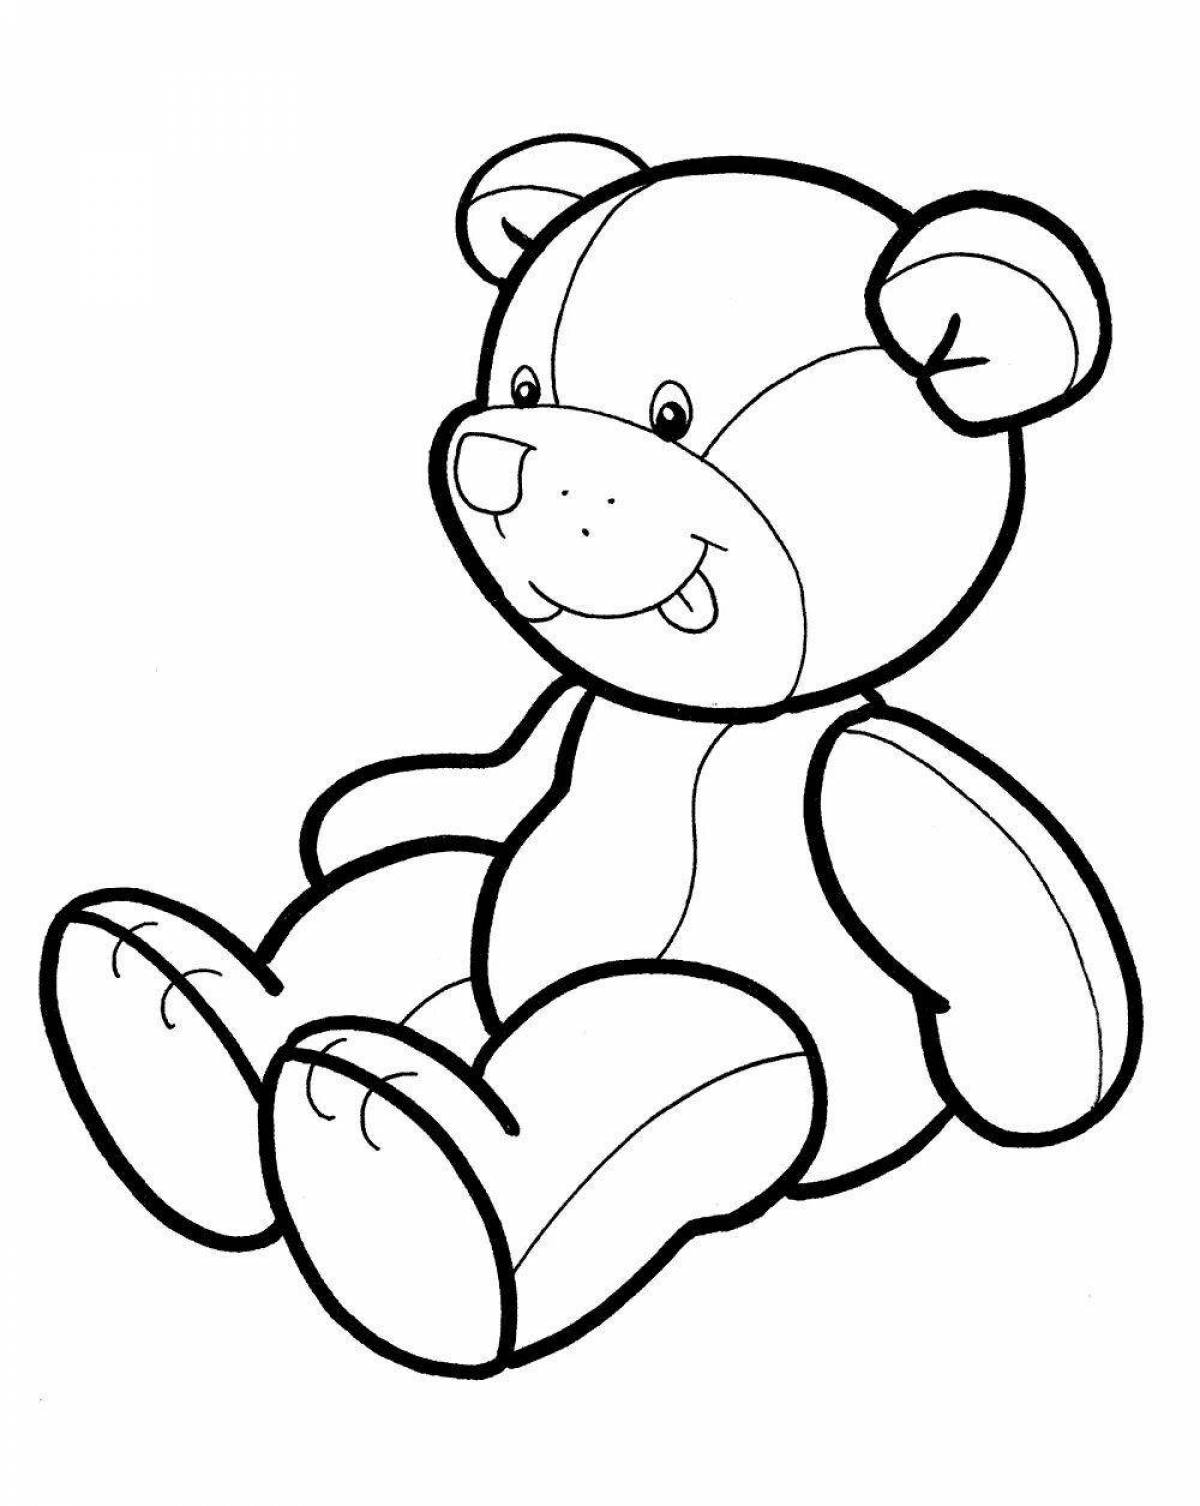 Delightful coloring bear for children 4-5 years old